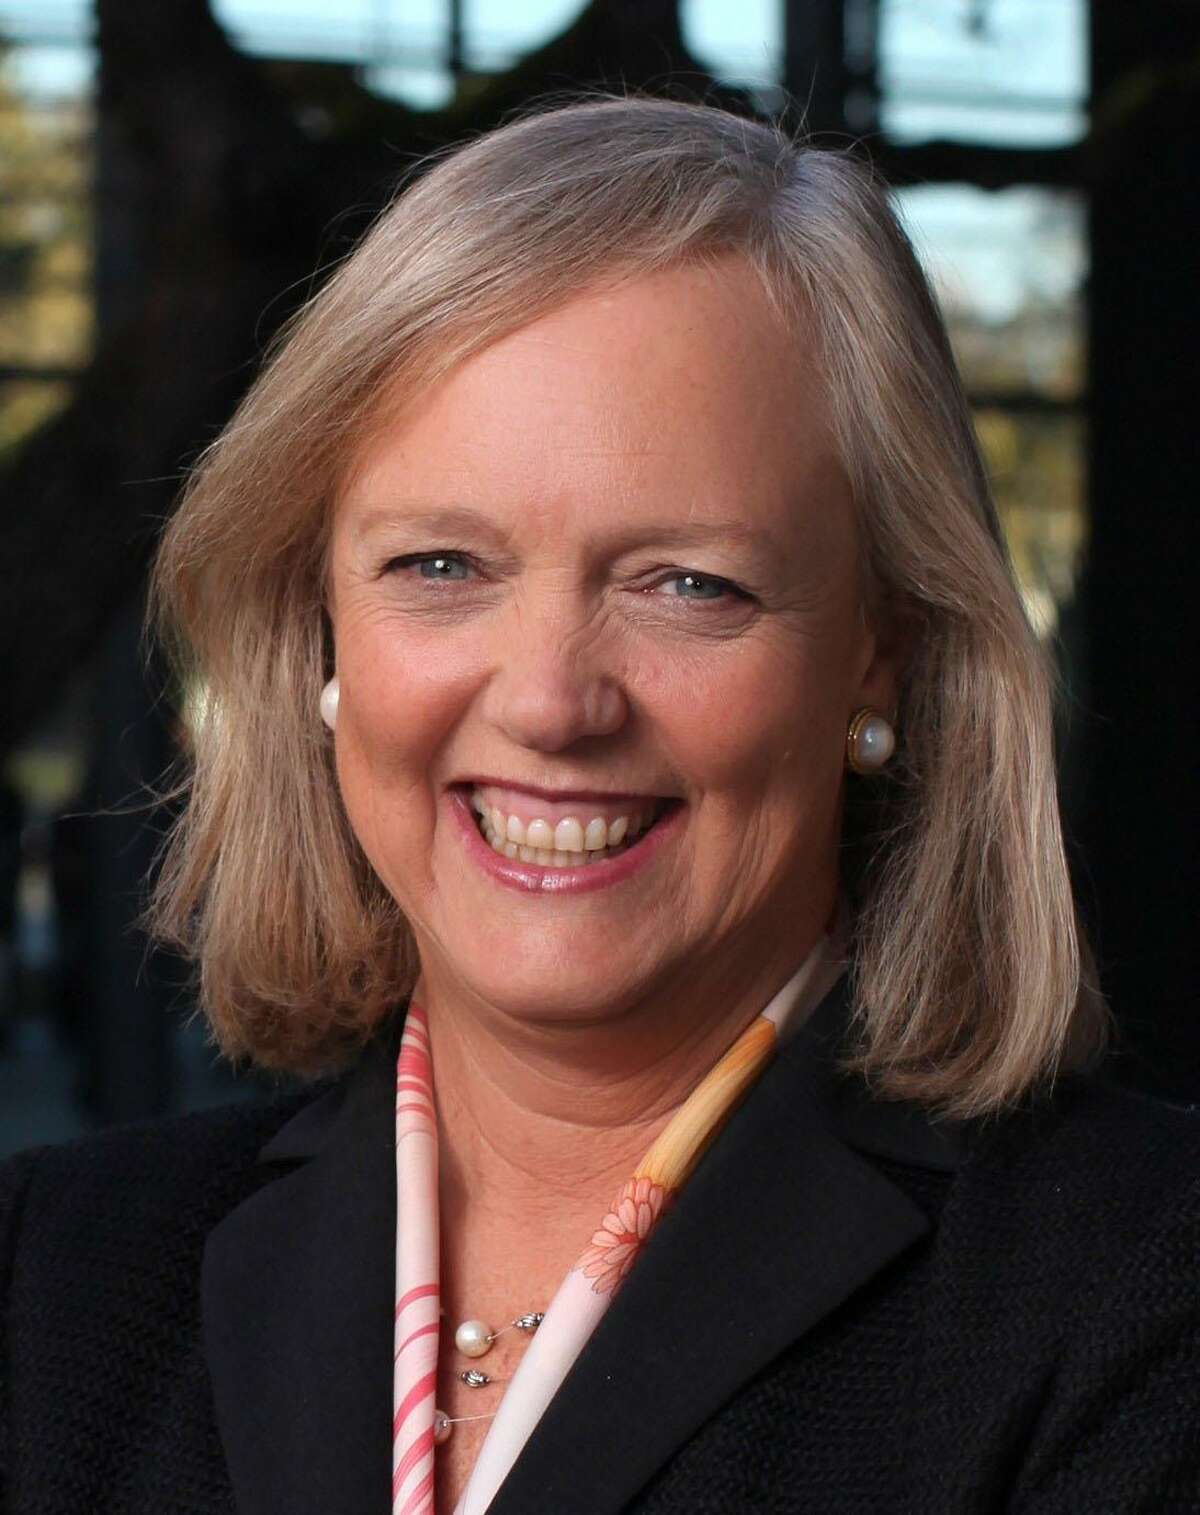 Meg Whitman, president and CEO of Hewlett Packard Enterprise and former CEO of eBay Inc., will be the guest speaker at Family Center’s May 2 breakfast fund-raiser.